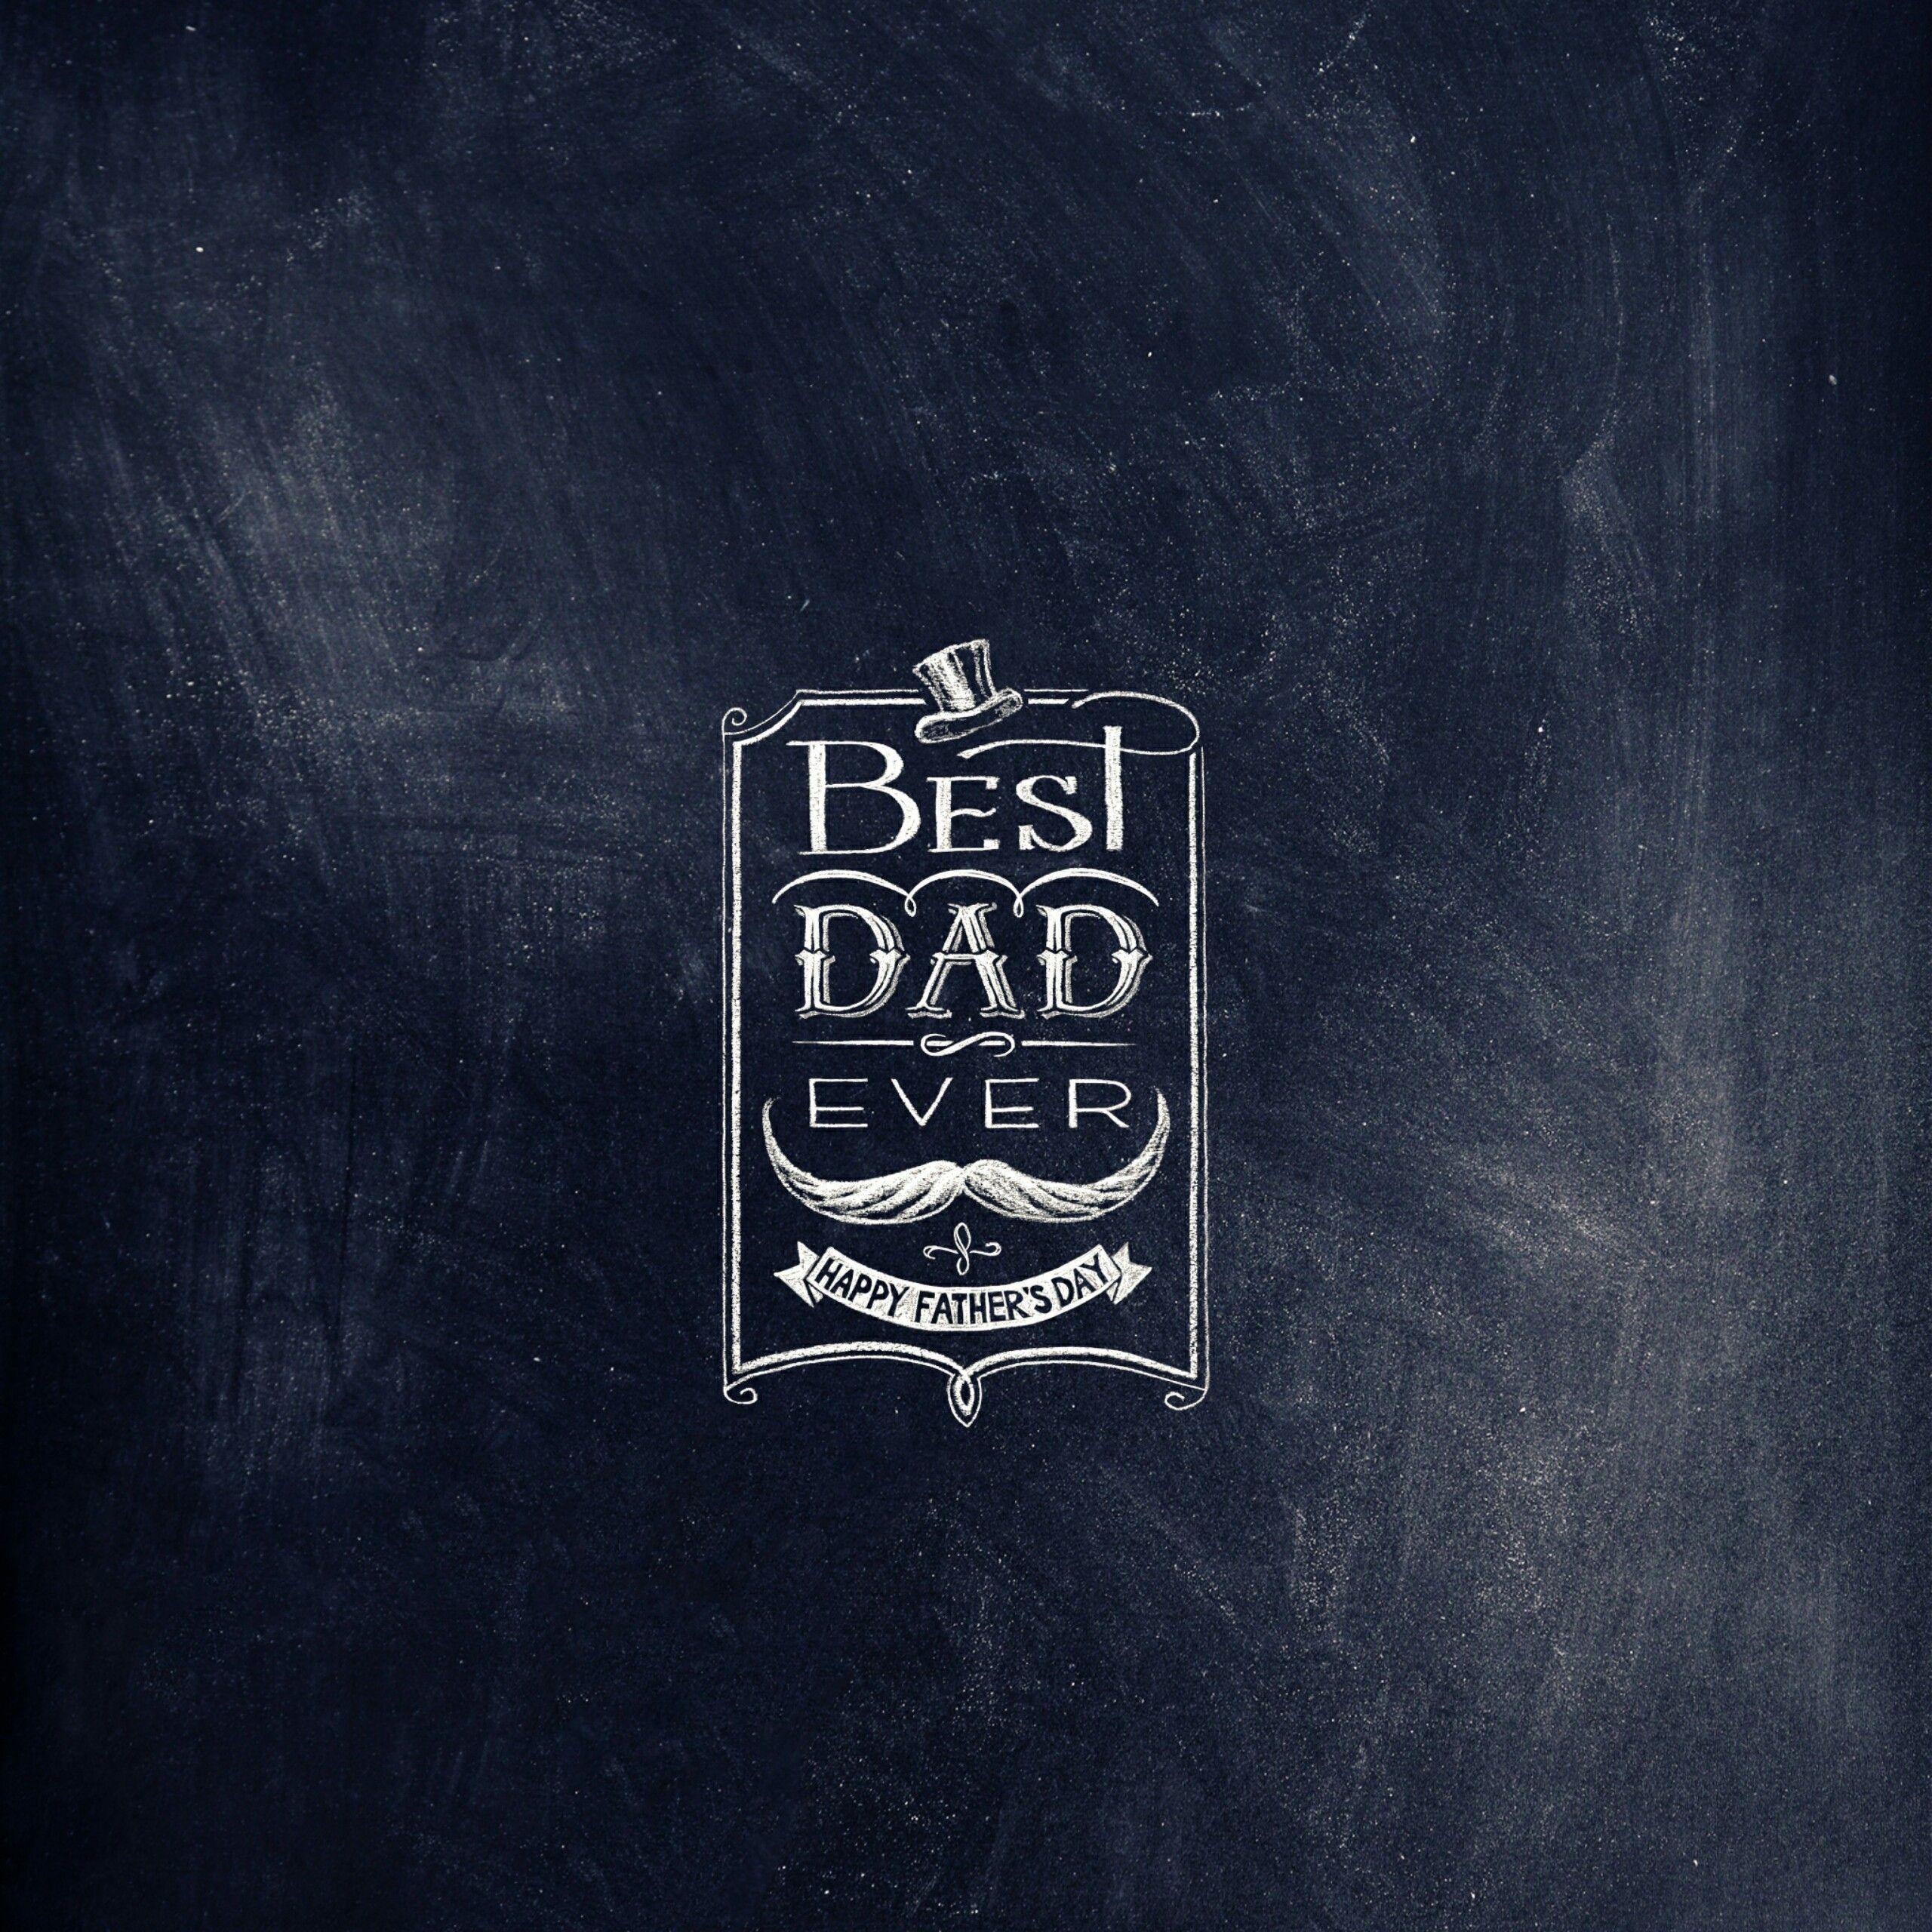 Best Dad Ever Happy Fathers Day Events QHD Wallpaper 2560x2560